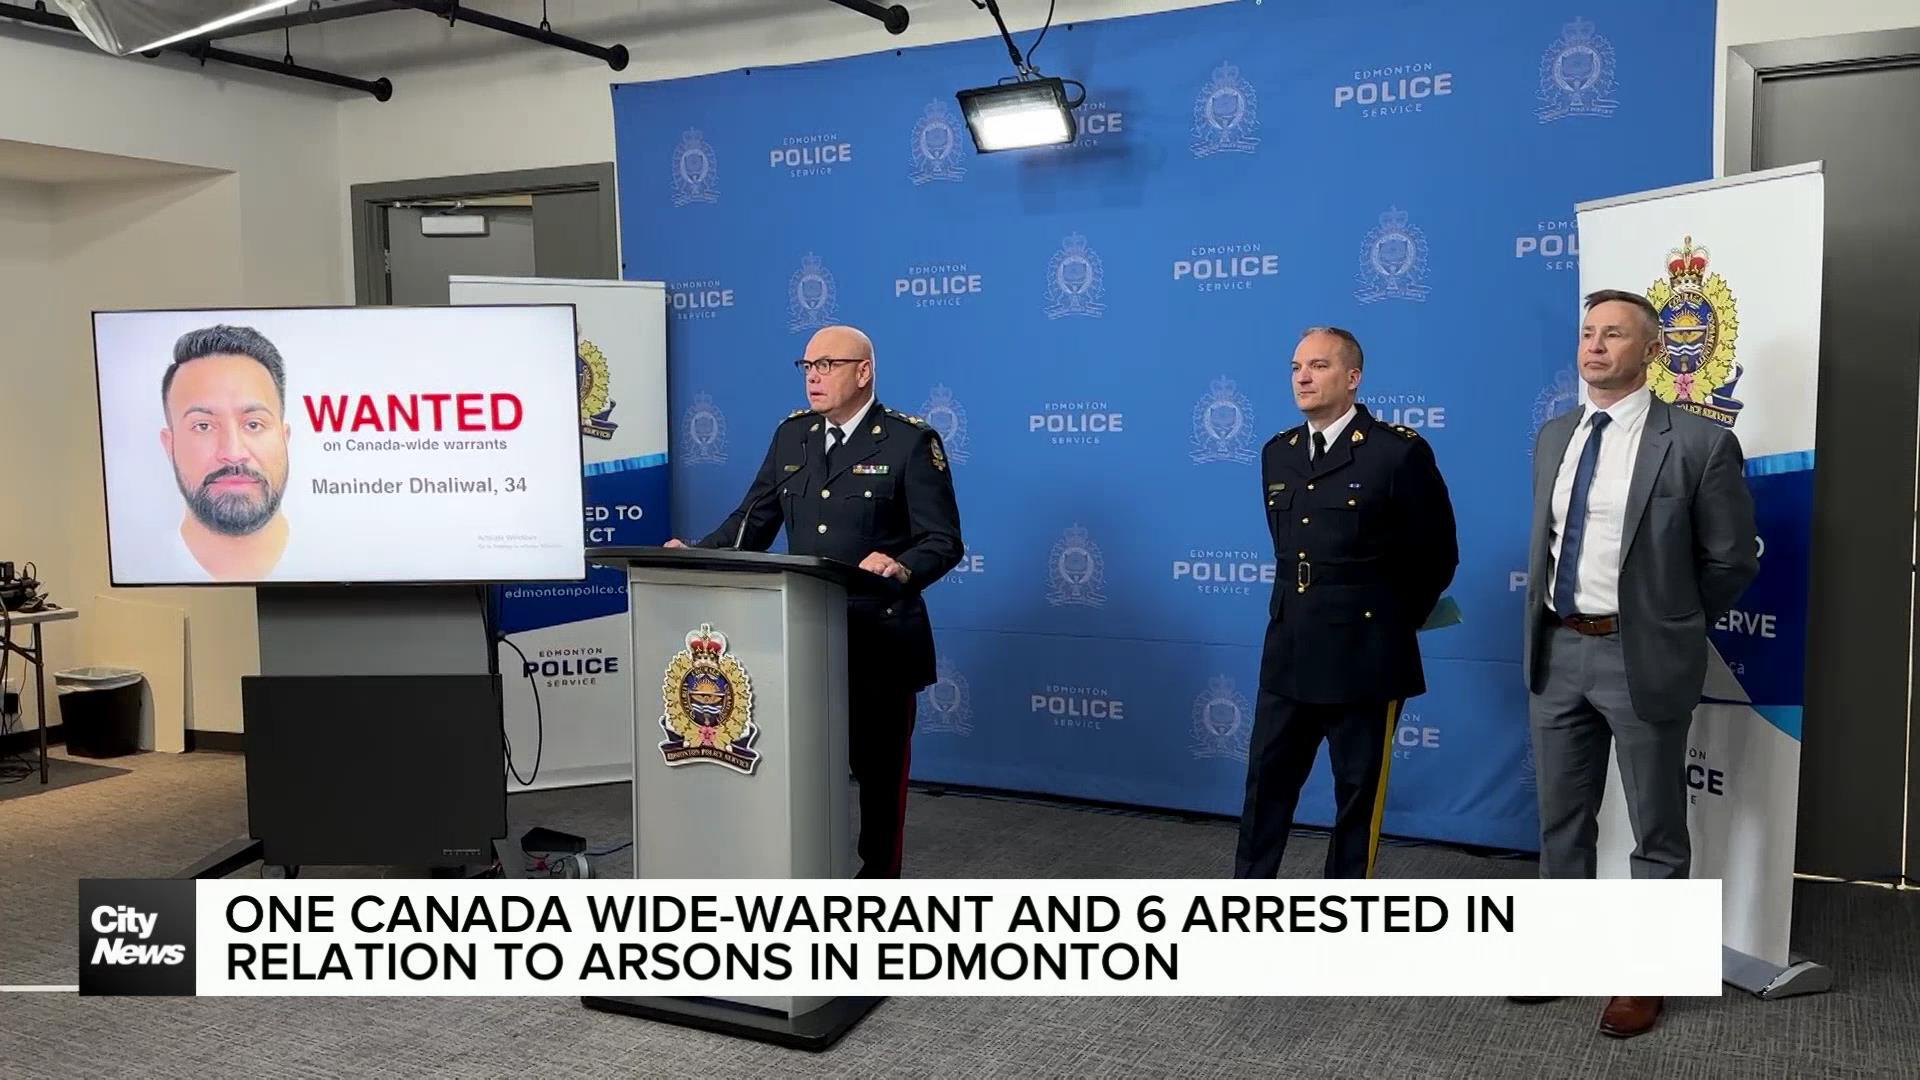 Edmonton police arrest 6 people, activate national warrant in relation to Arson